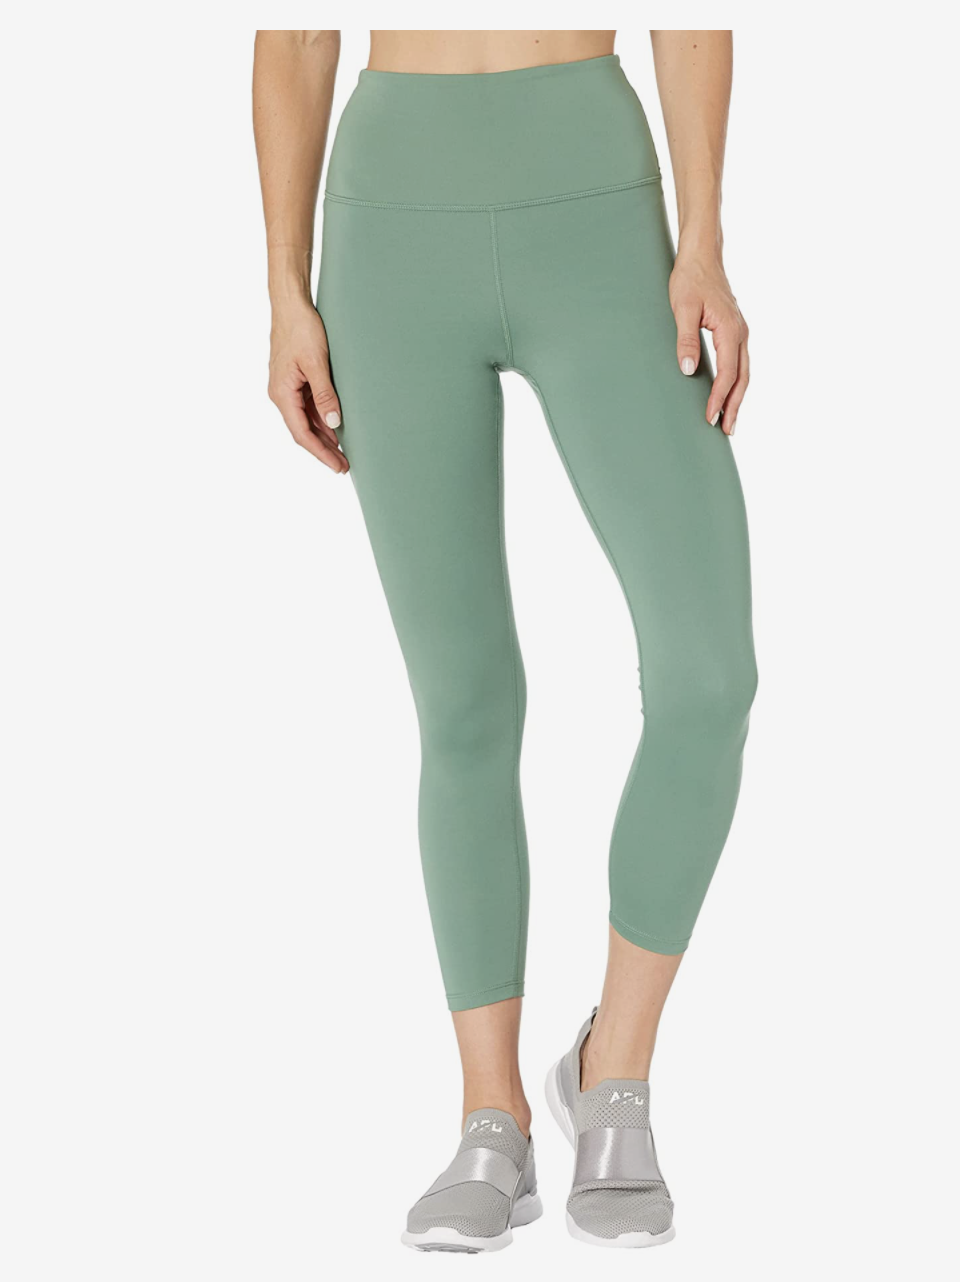 https://www.usmagazine.com/wp-content/uploads/2021/09/Carbon38-High-Rise-78-Length-Leggings-In-Cloud-Compression.png?w=960&quality=86&strip=all